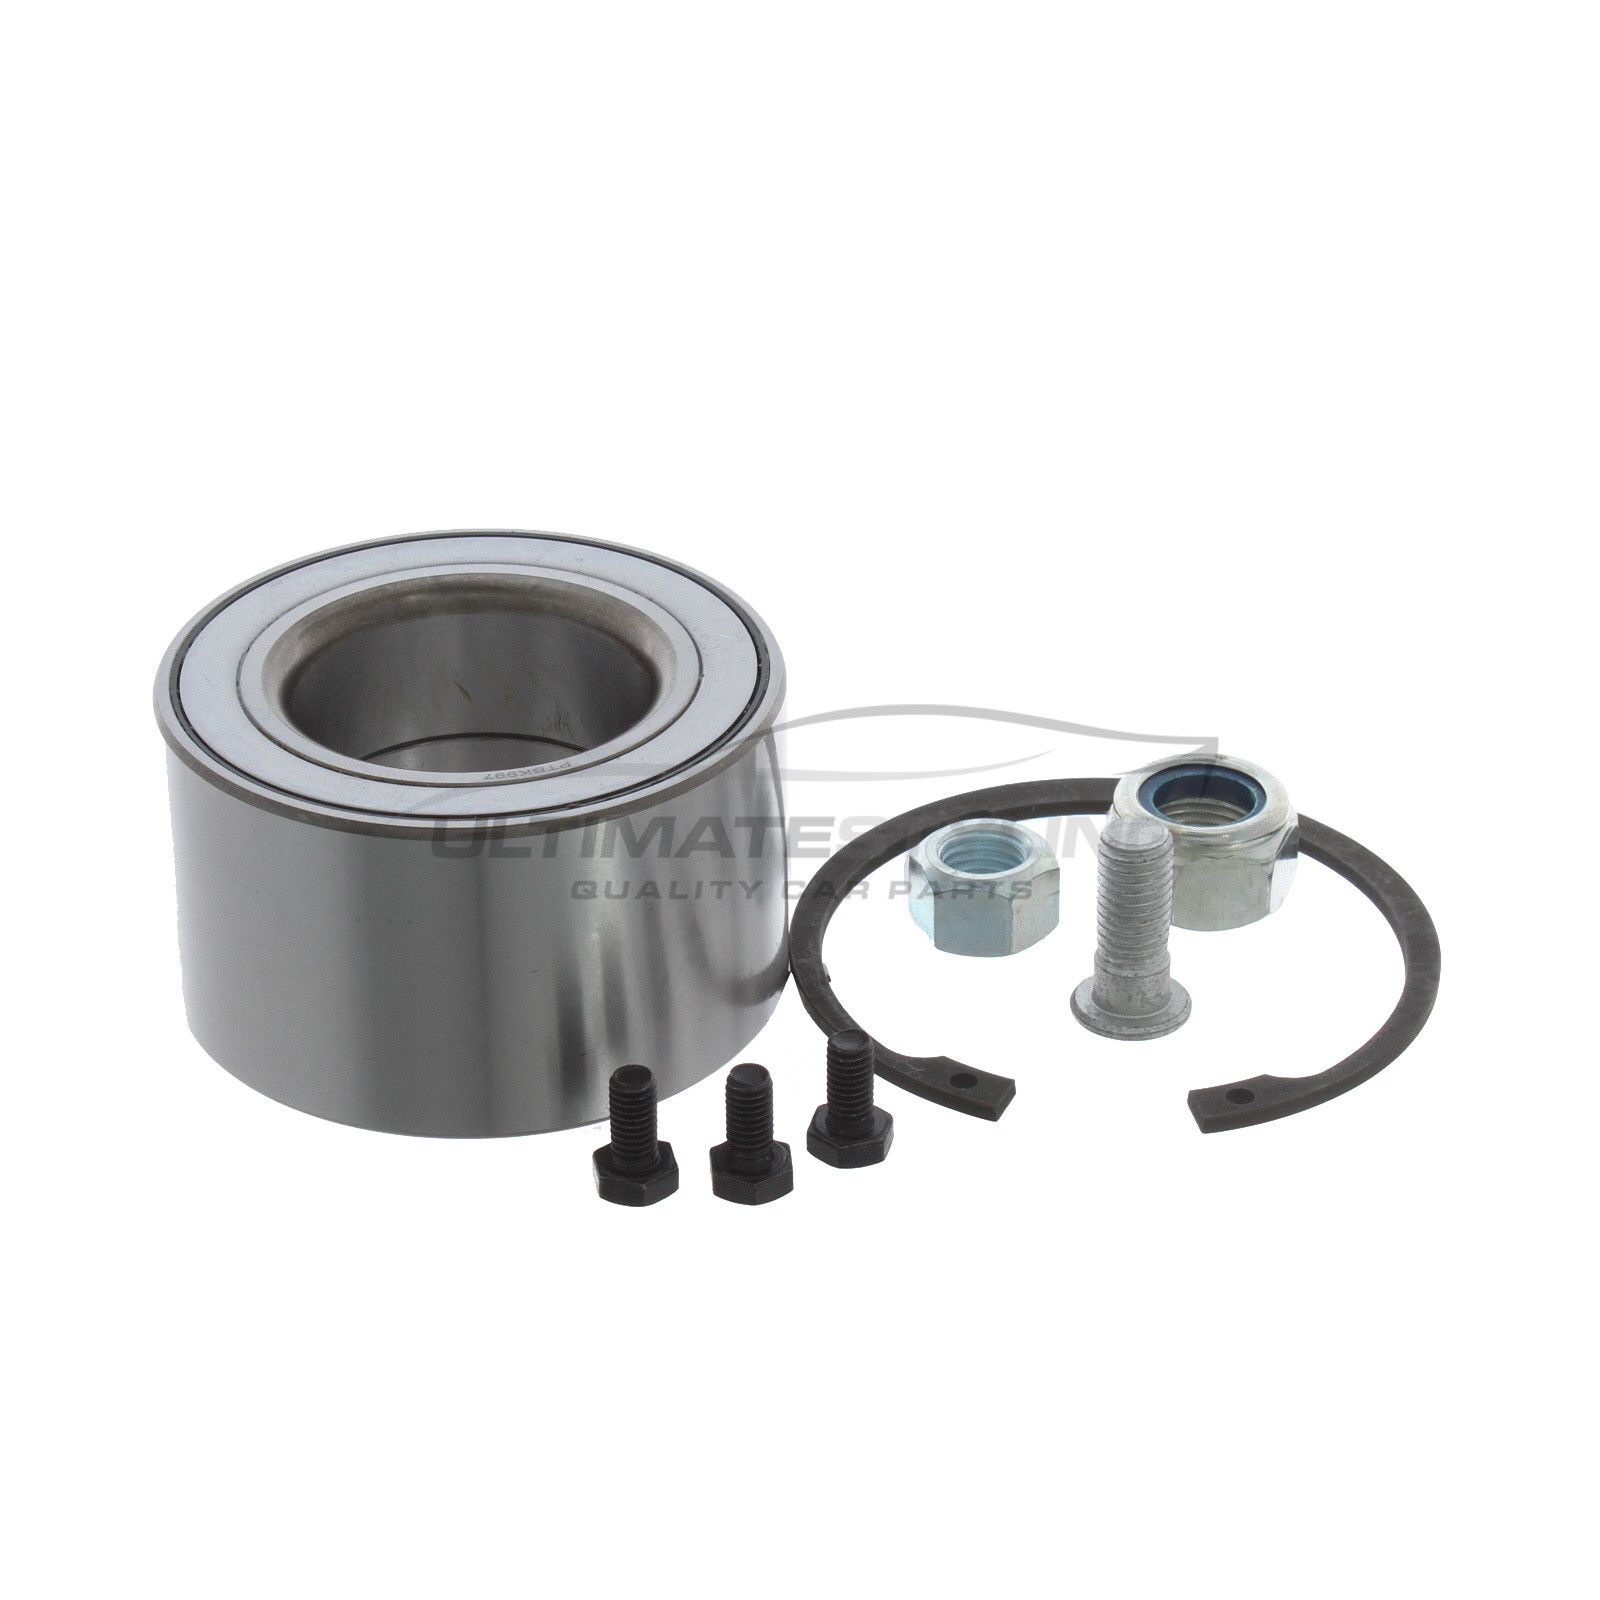 Front <span style="color:red;"><strong>OR</strong></span> Rear Wheel Bearing Kit for VW Caravelle